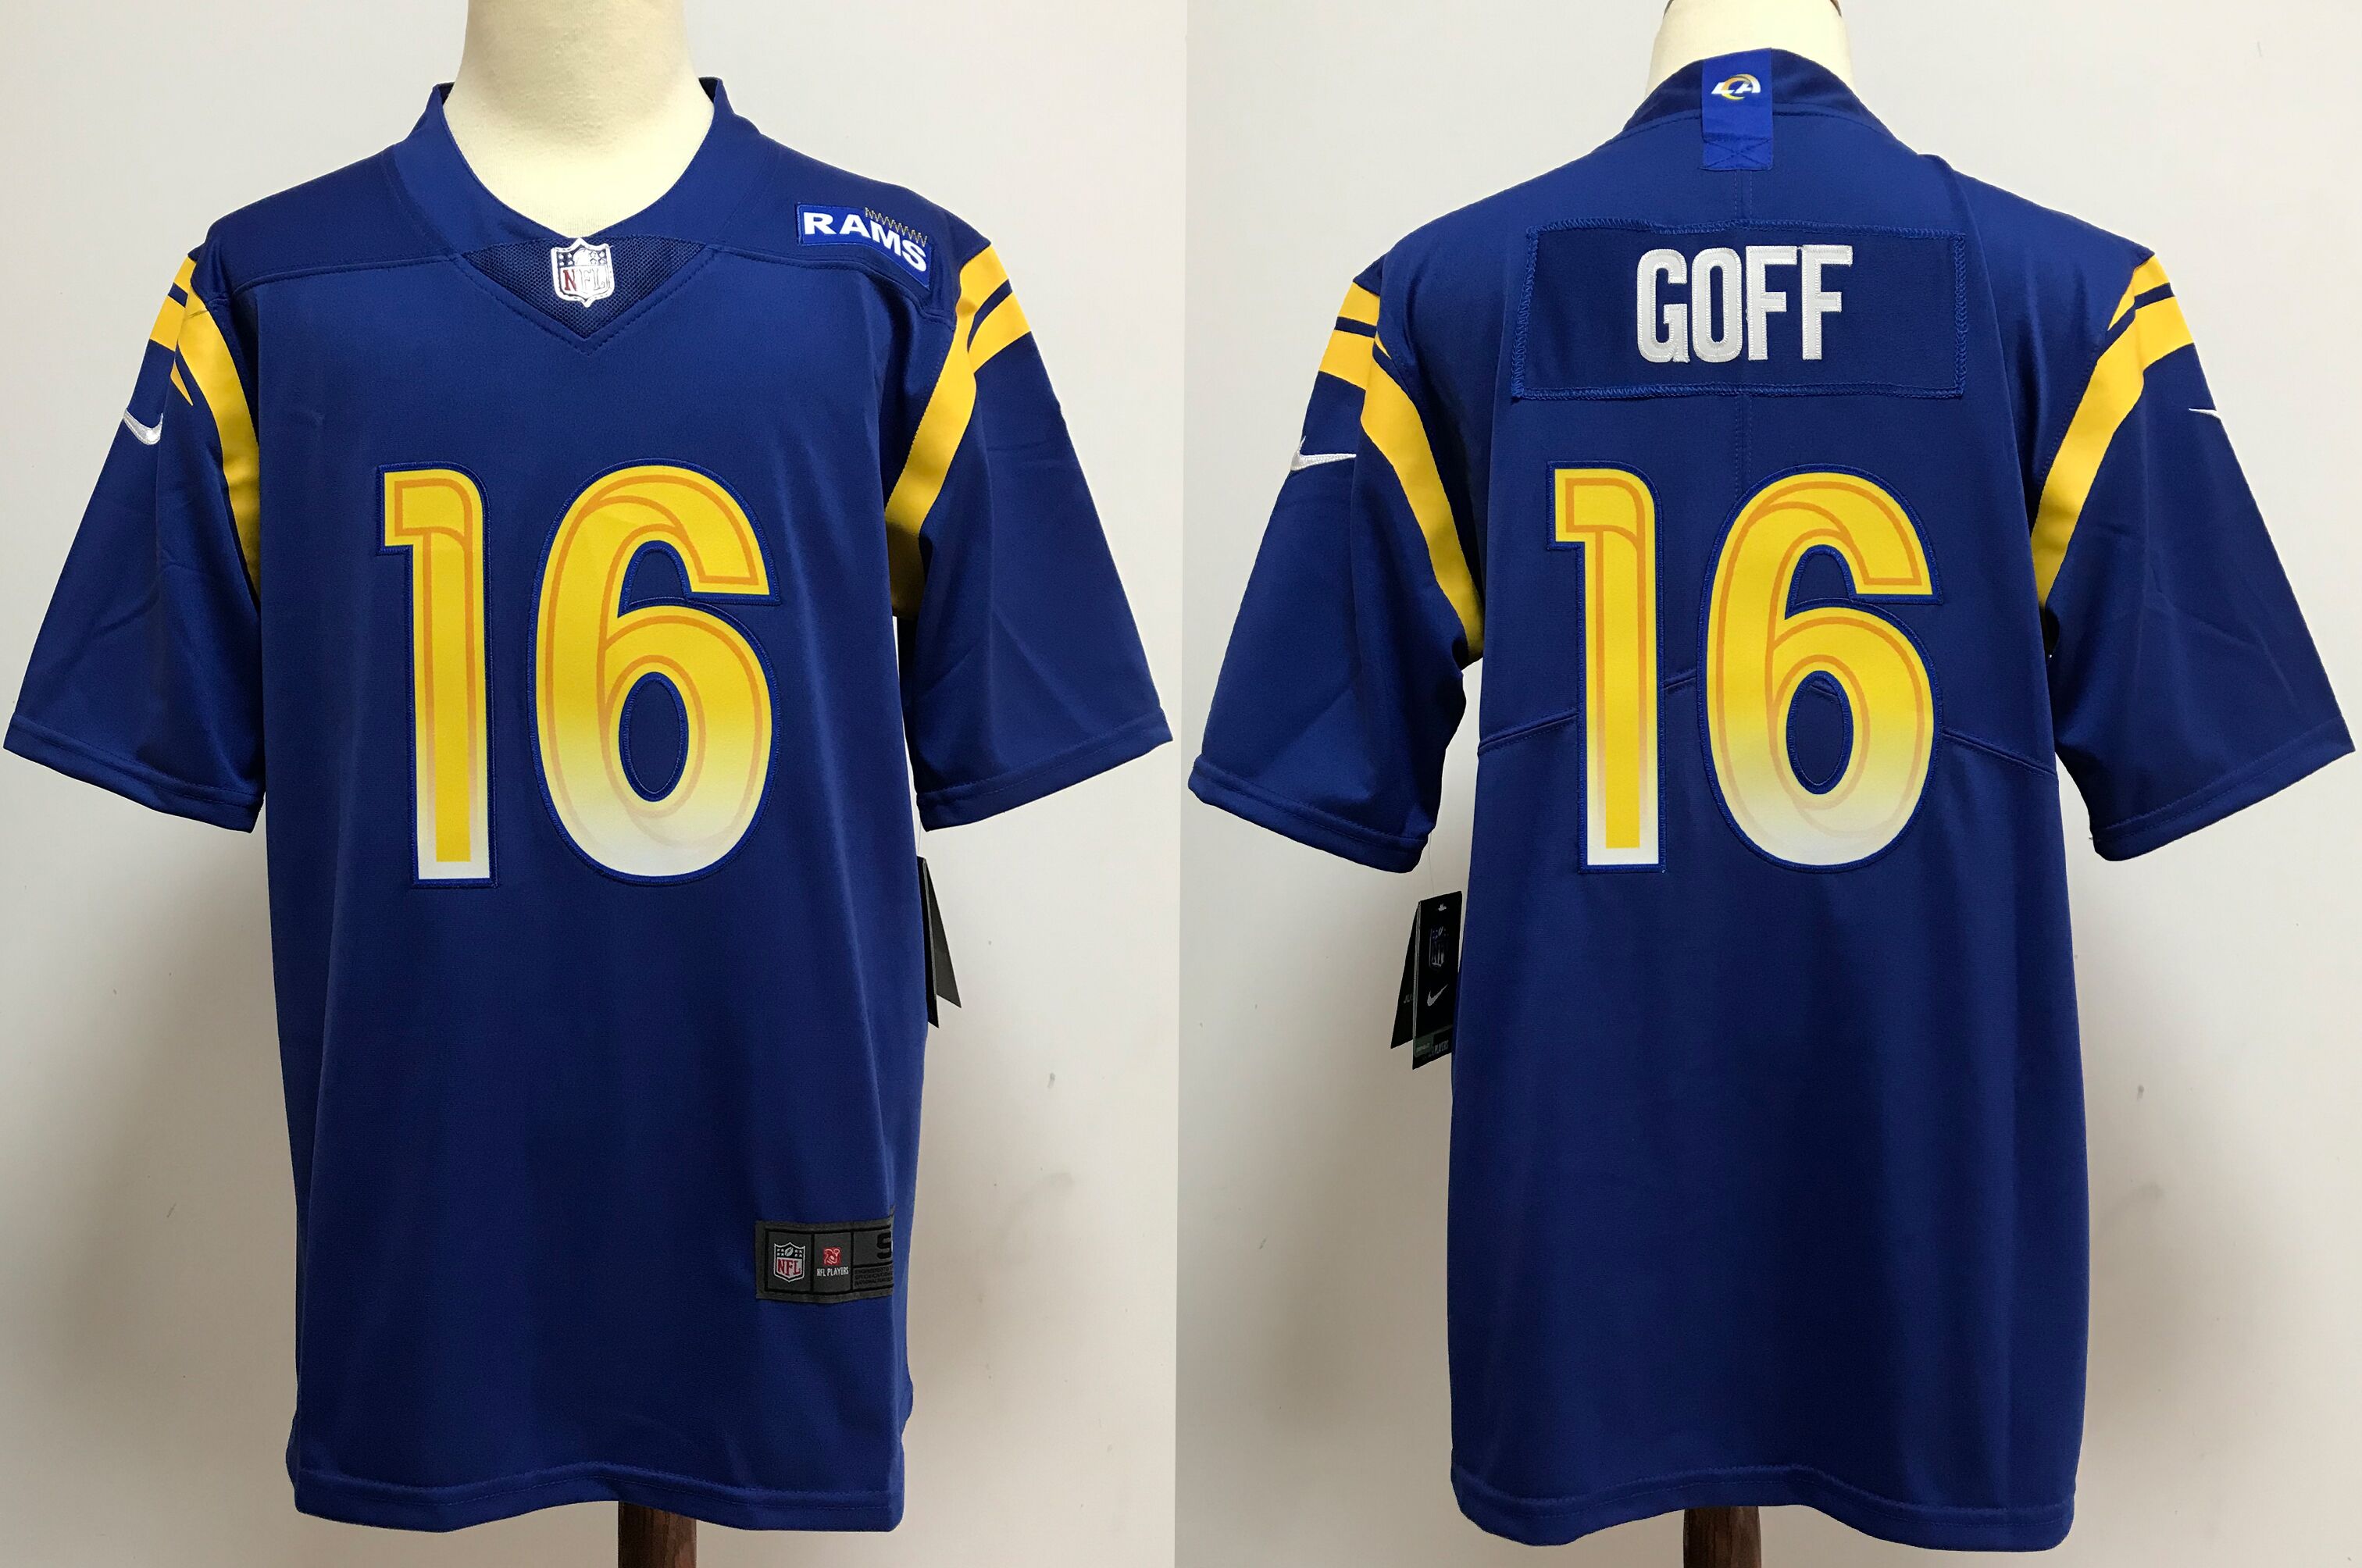 NFL Los Angeles Rams #16 Goff Blue Vapor Limited Jersey